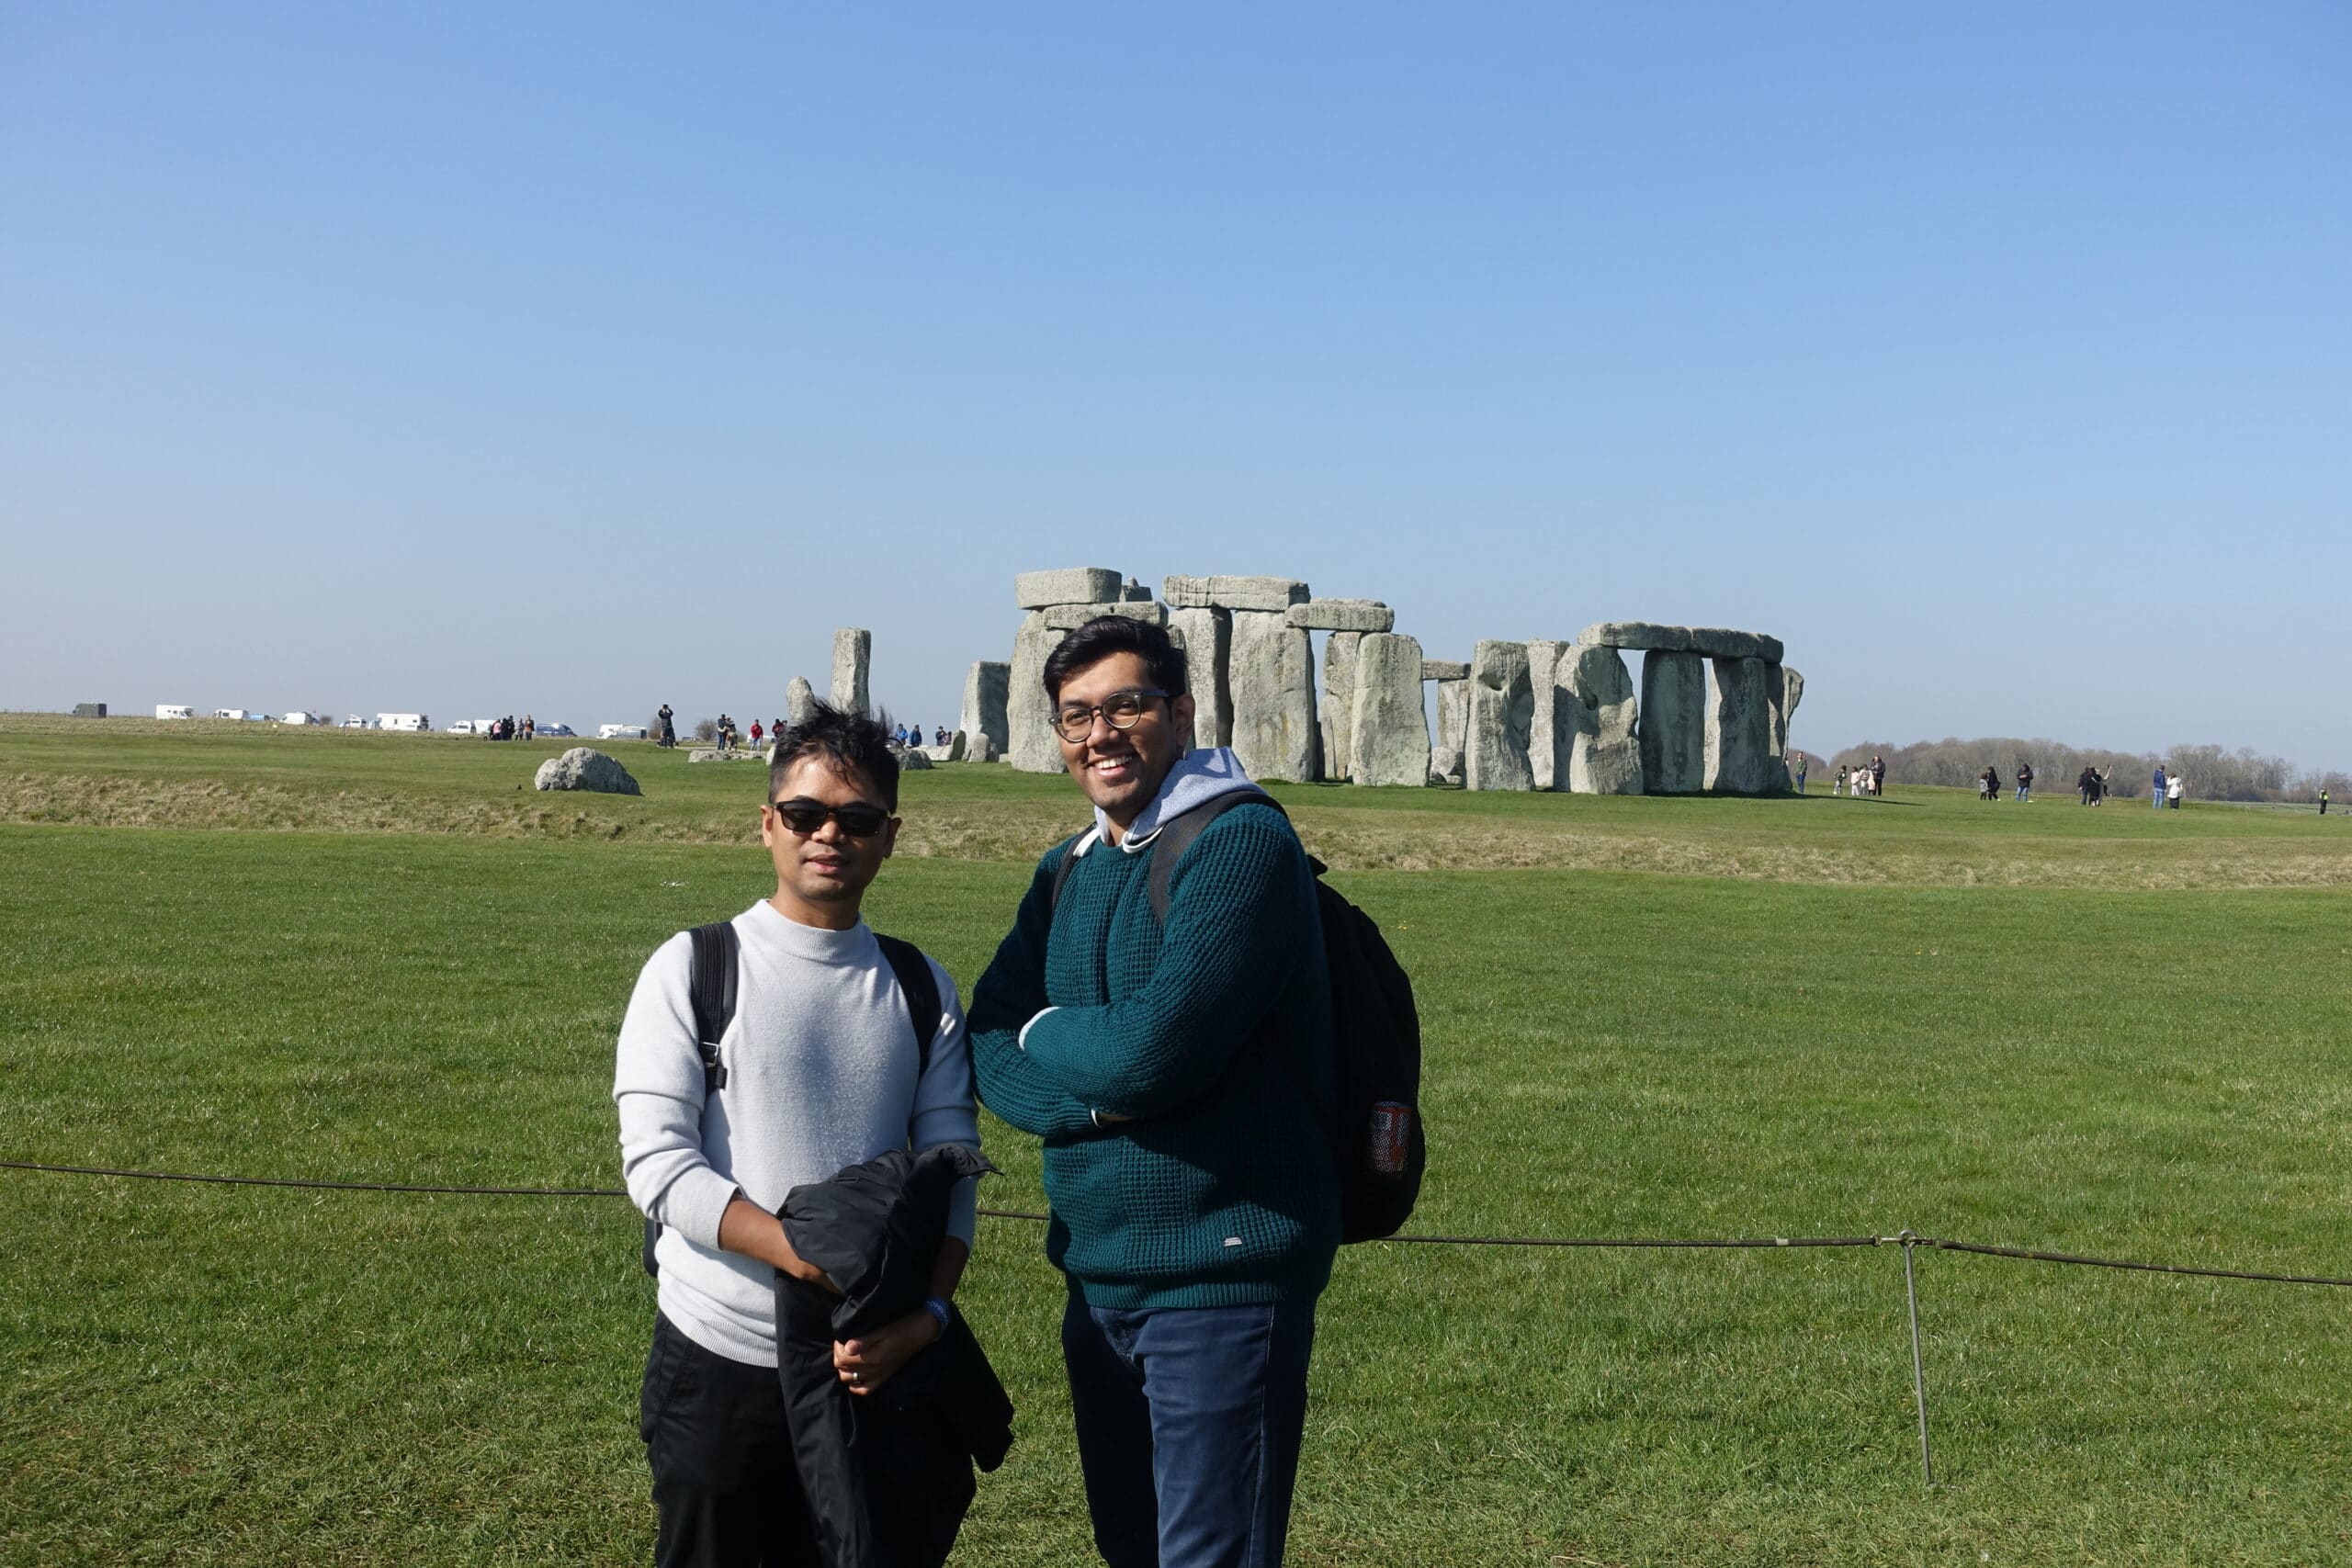 Two people take a photo in front of Stonehenge